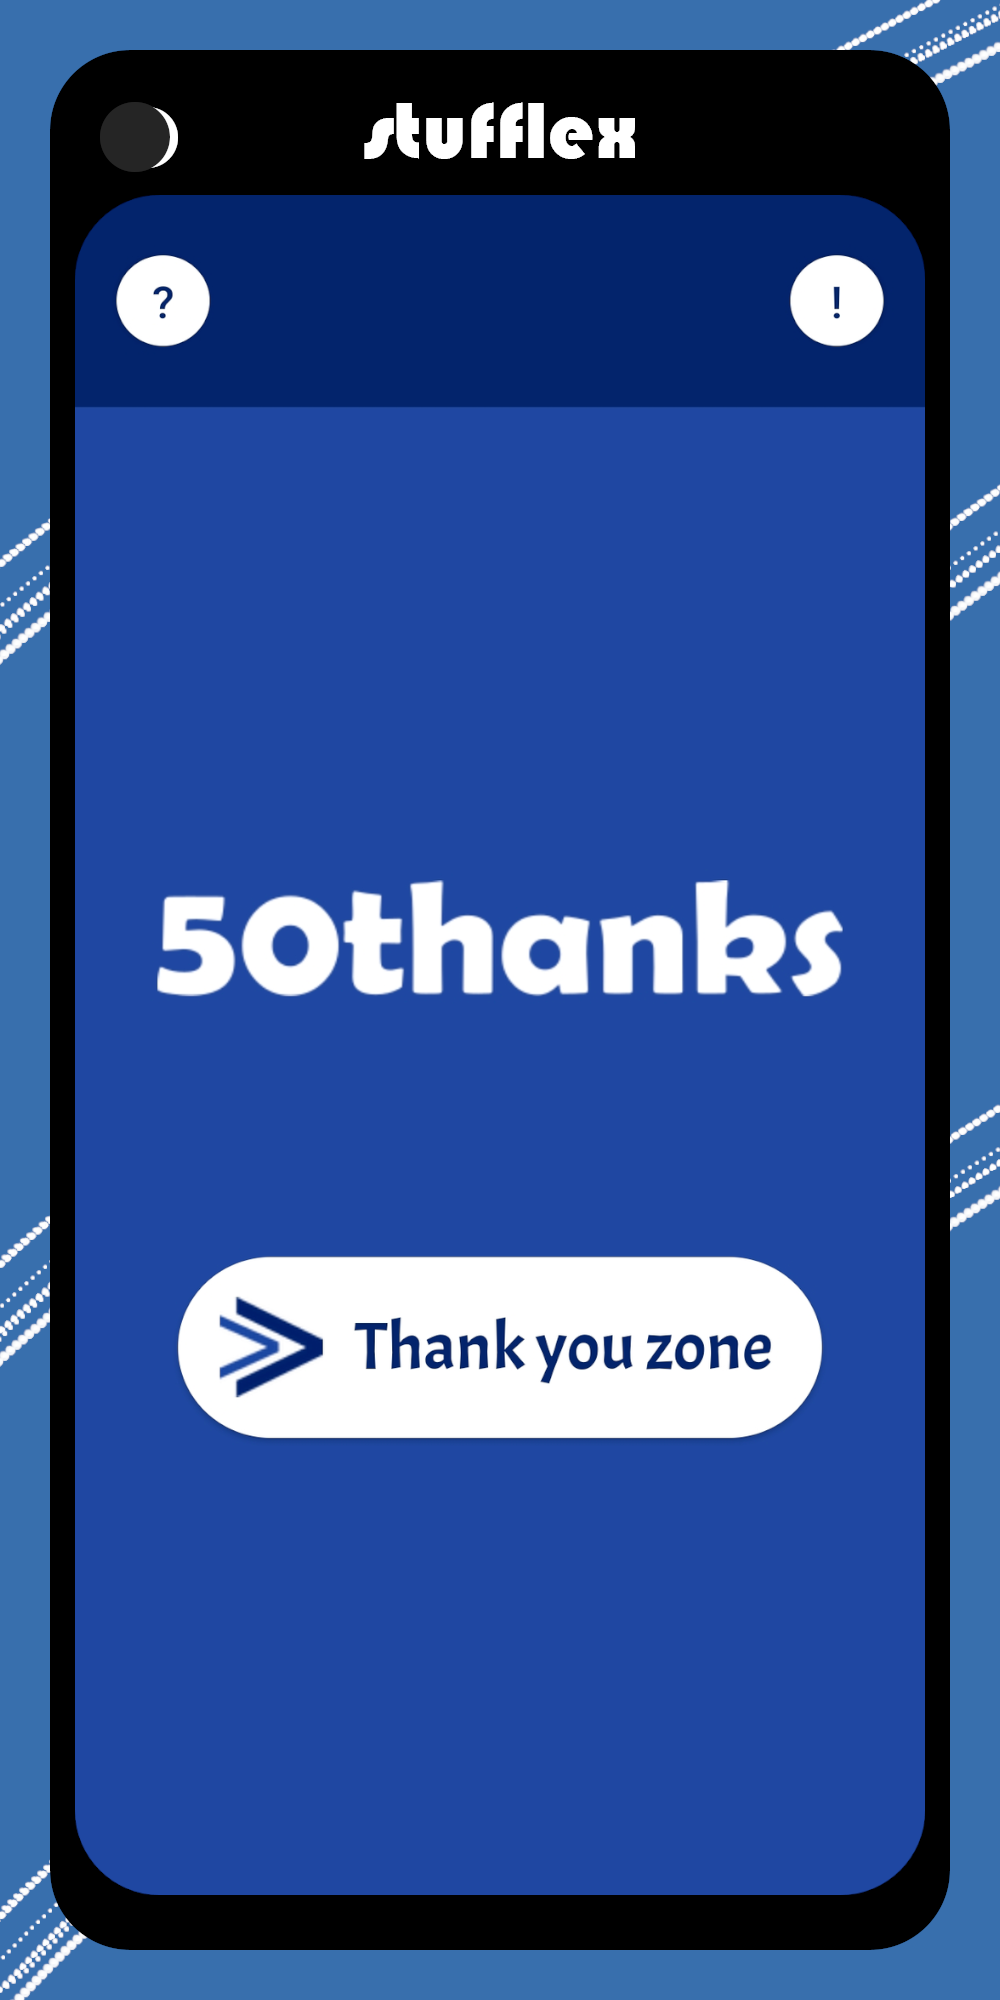 50thanks: 'Thank you' in 50 different languages